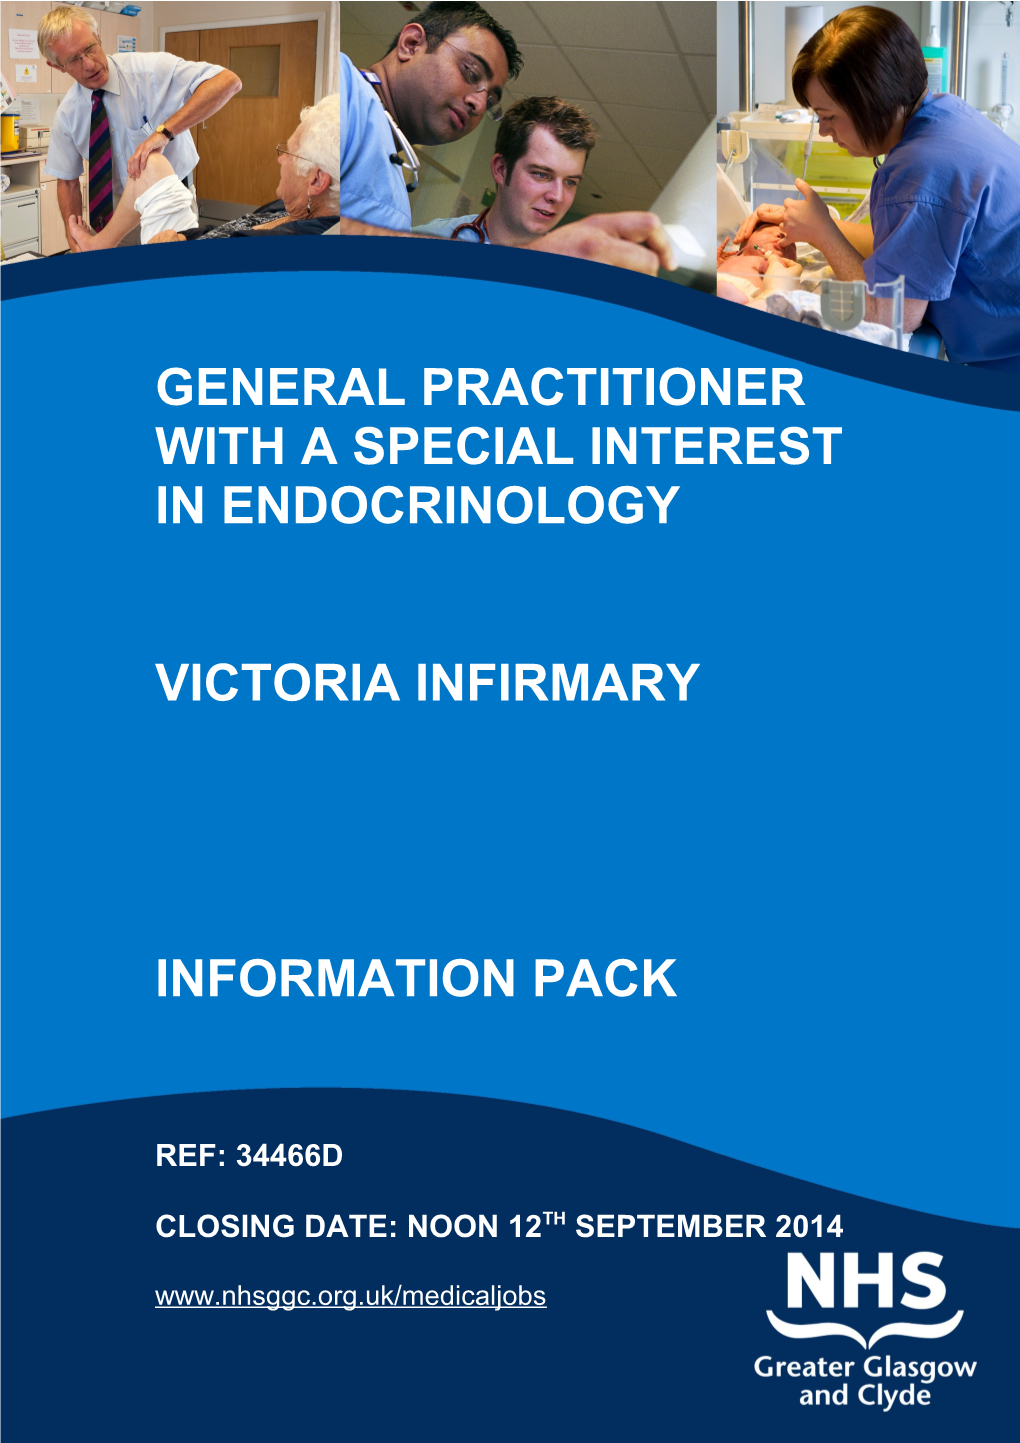 General Practitioner with a Special Interest in Endocrinology